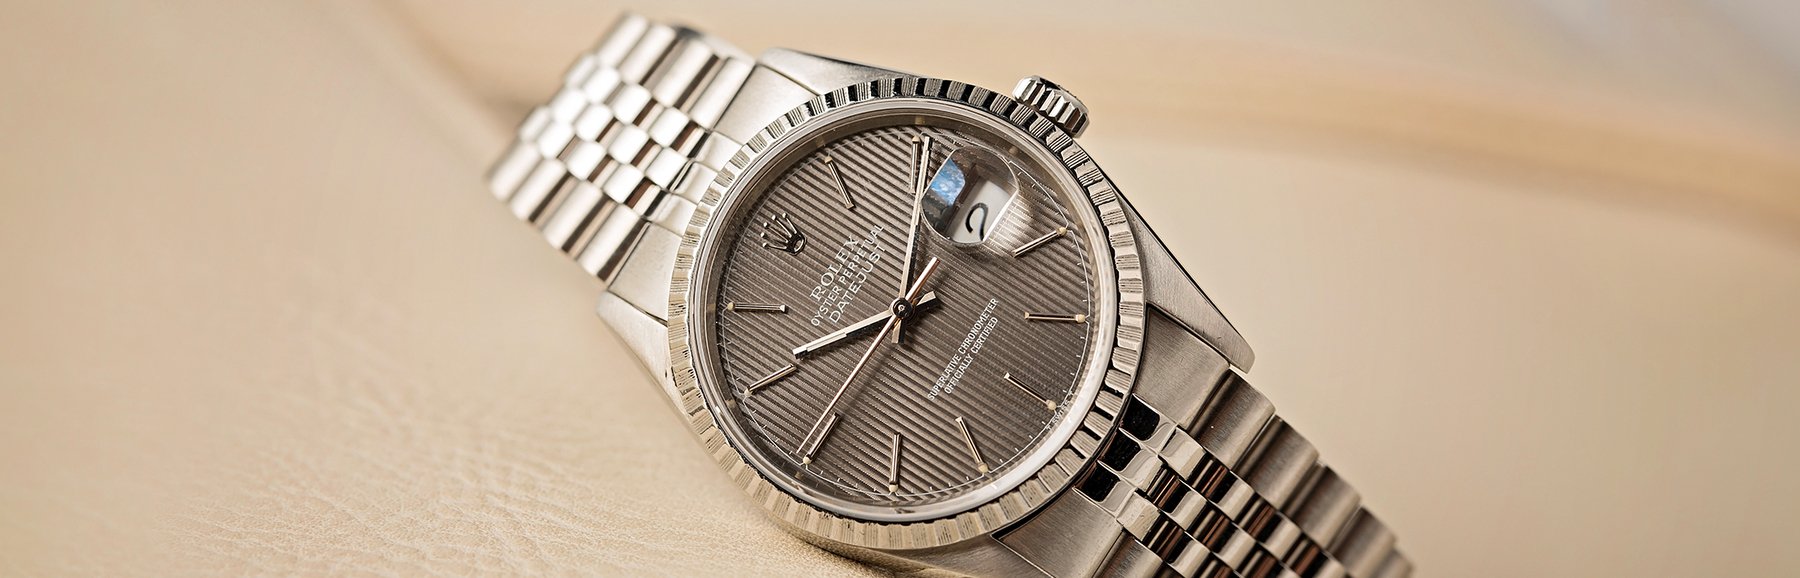 How To Change Date on Rolex